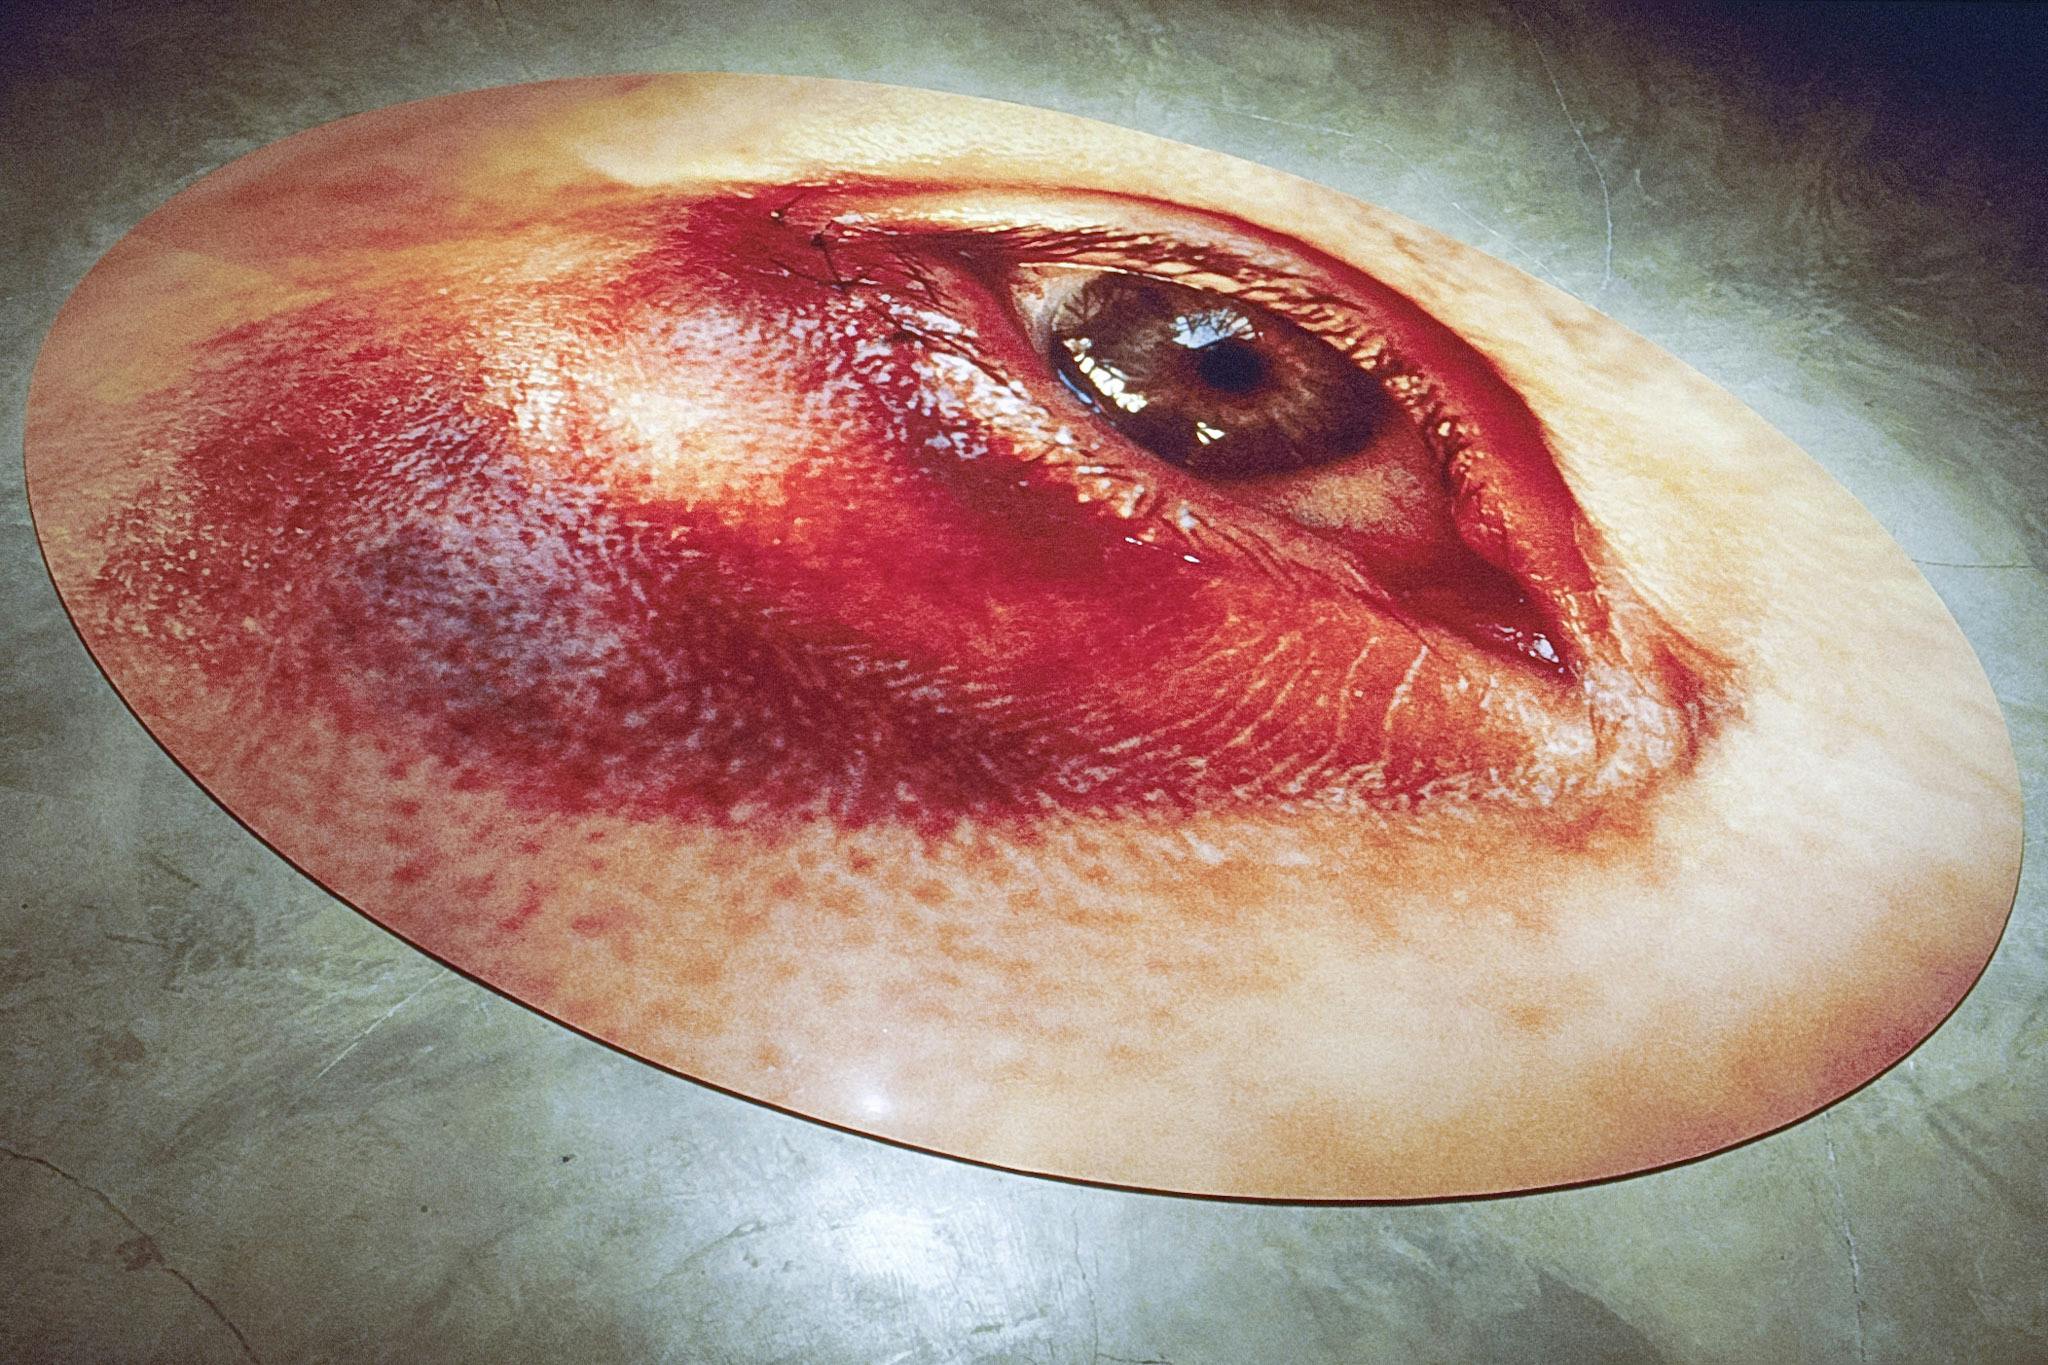 This is a close-up view of a photograph placed on the gallery floor. This circular-shaped photograph shows a brown eye with a red blue circle beneath it.  